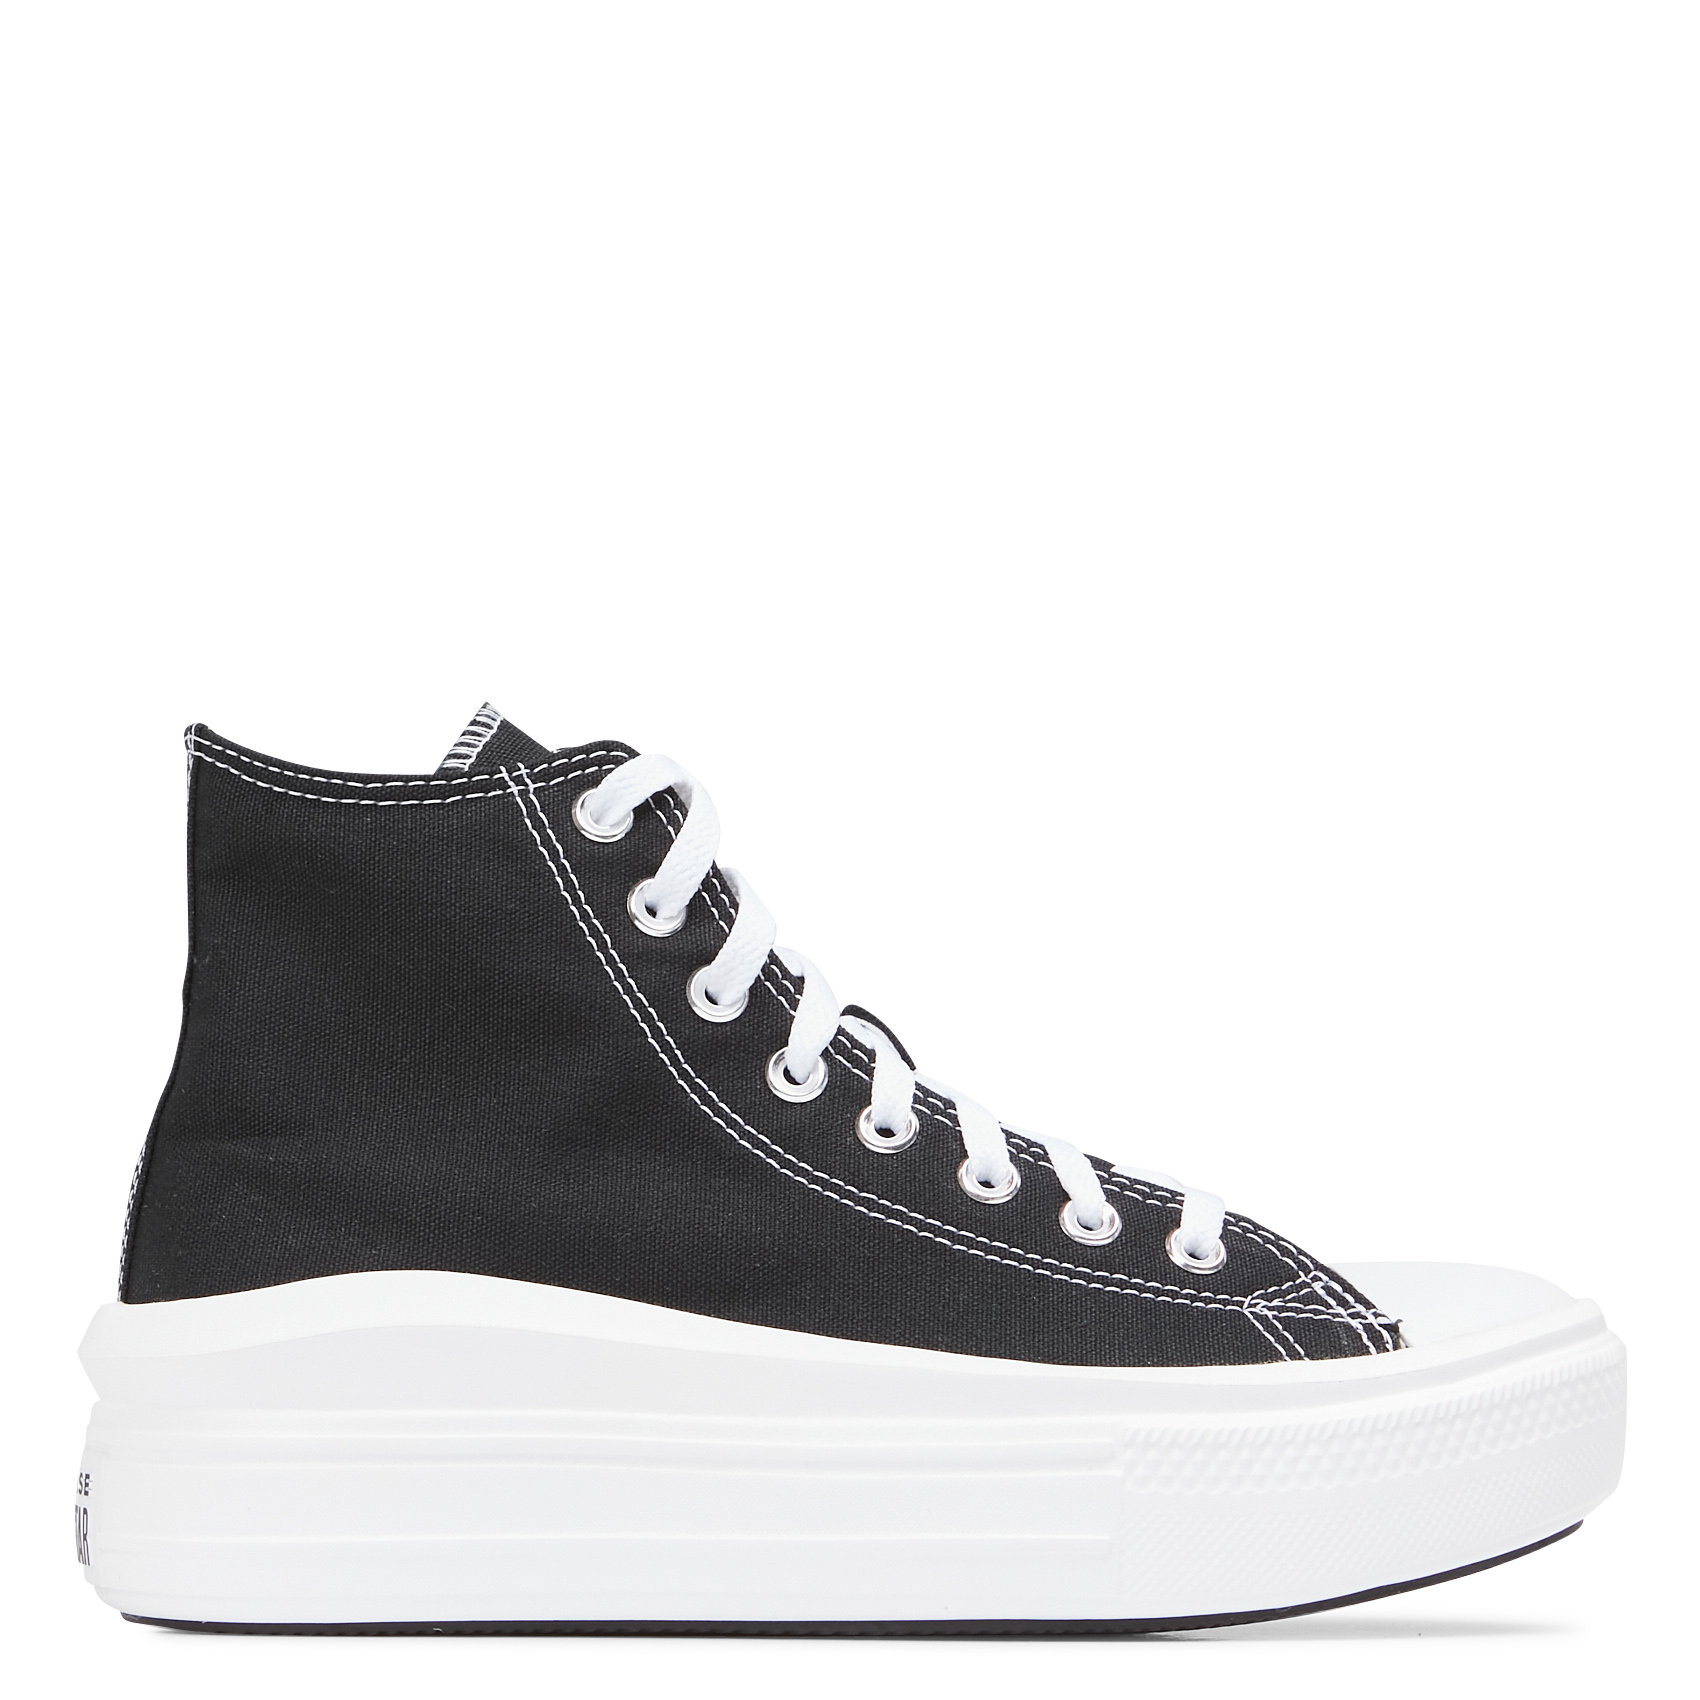 converse chuck taylor all star block party graphic high top